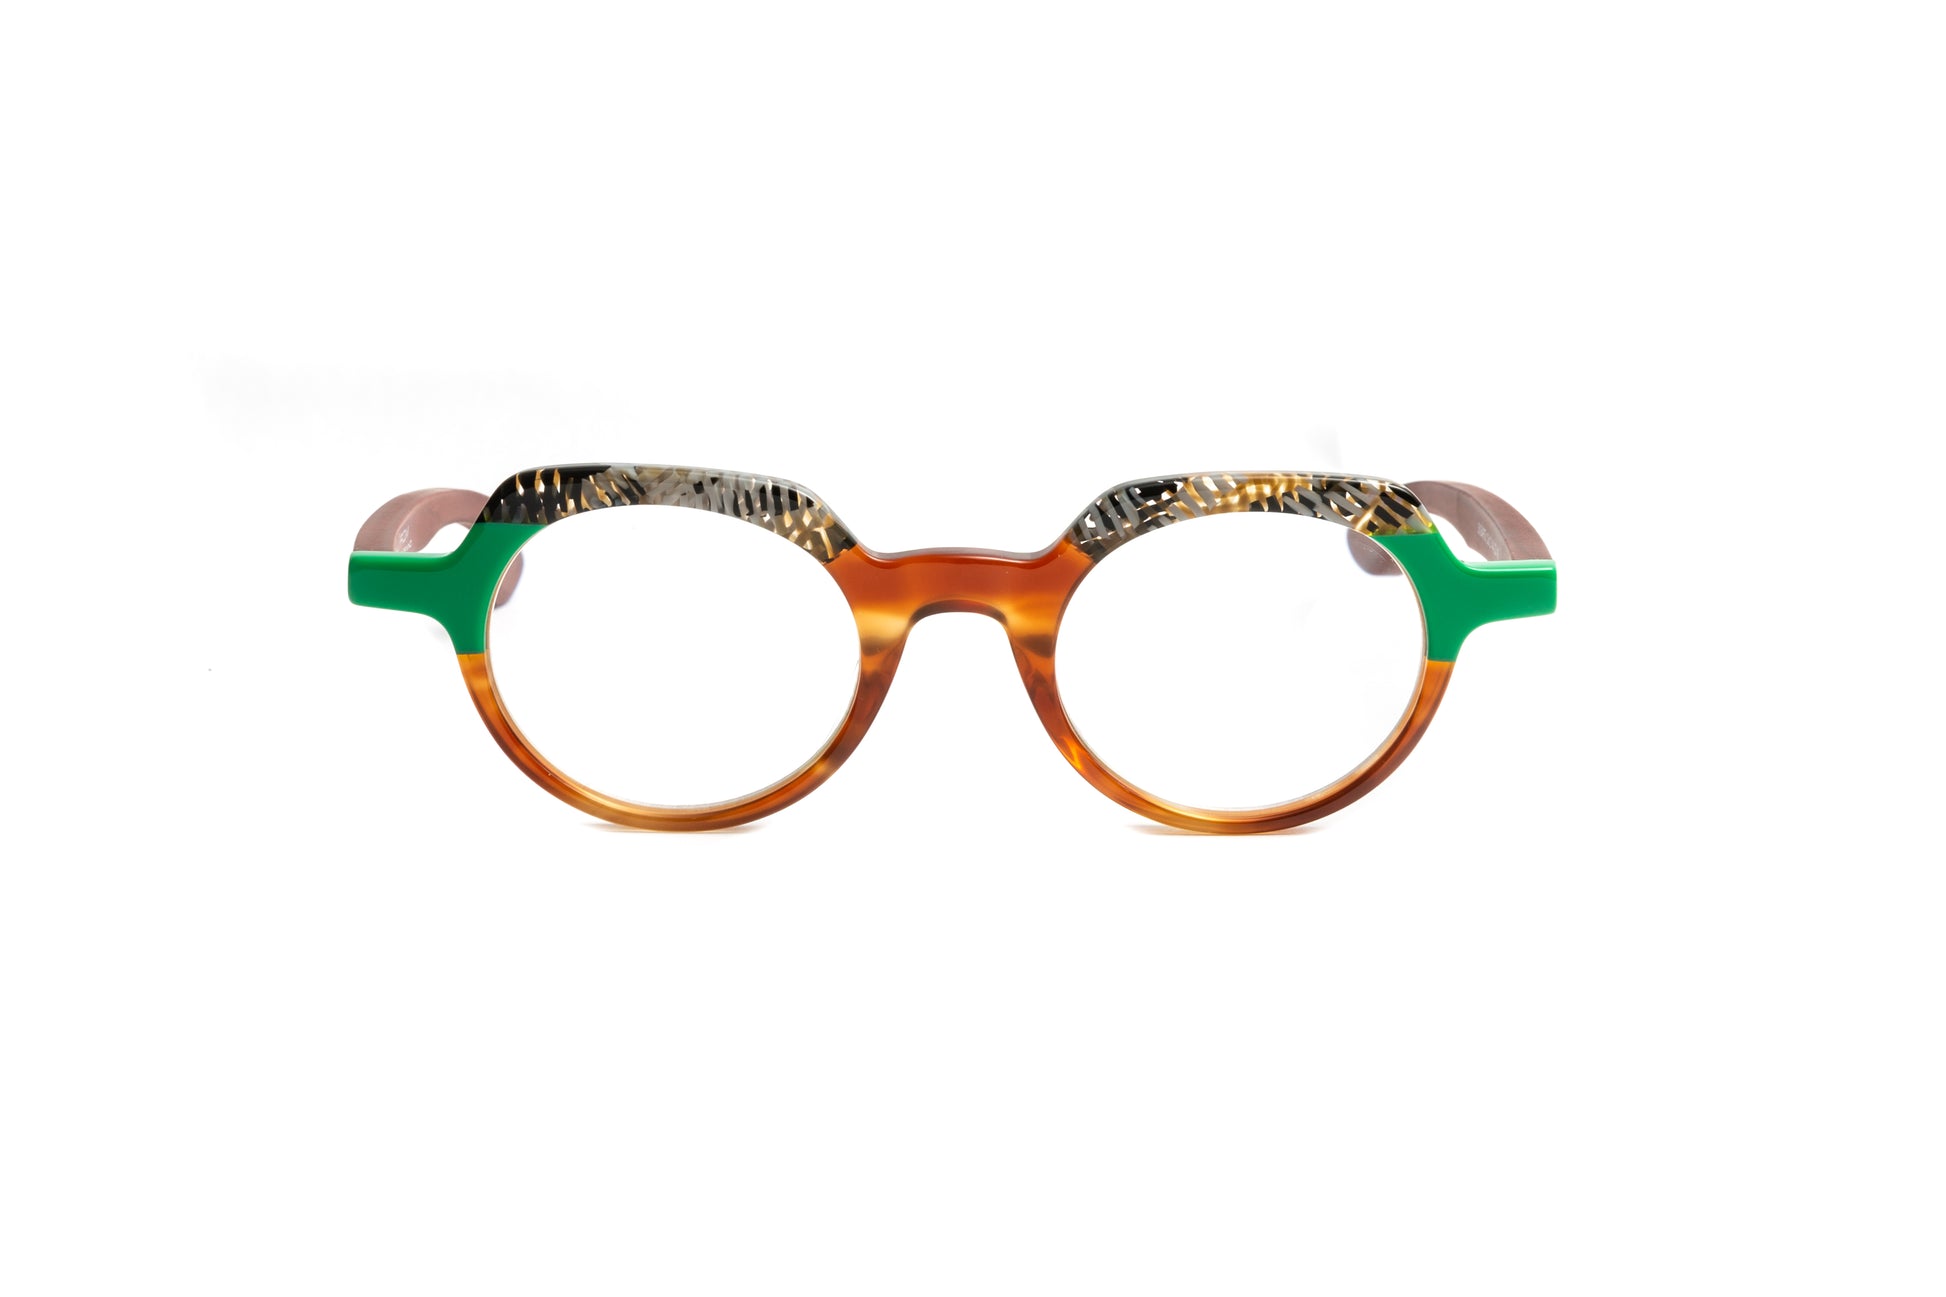 St Barths round unisex reading glasses with a multi color green, tortoise, brown acetate frame and cherry wood temples by Eyejets